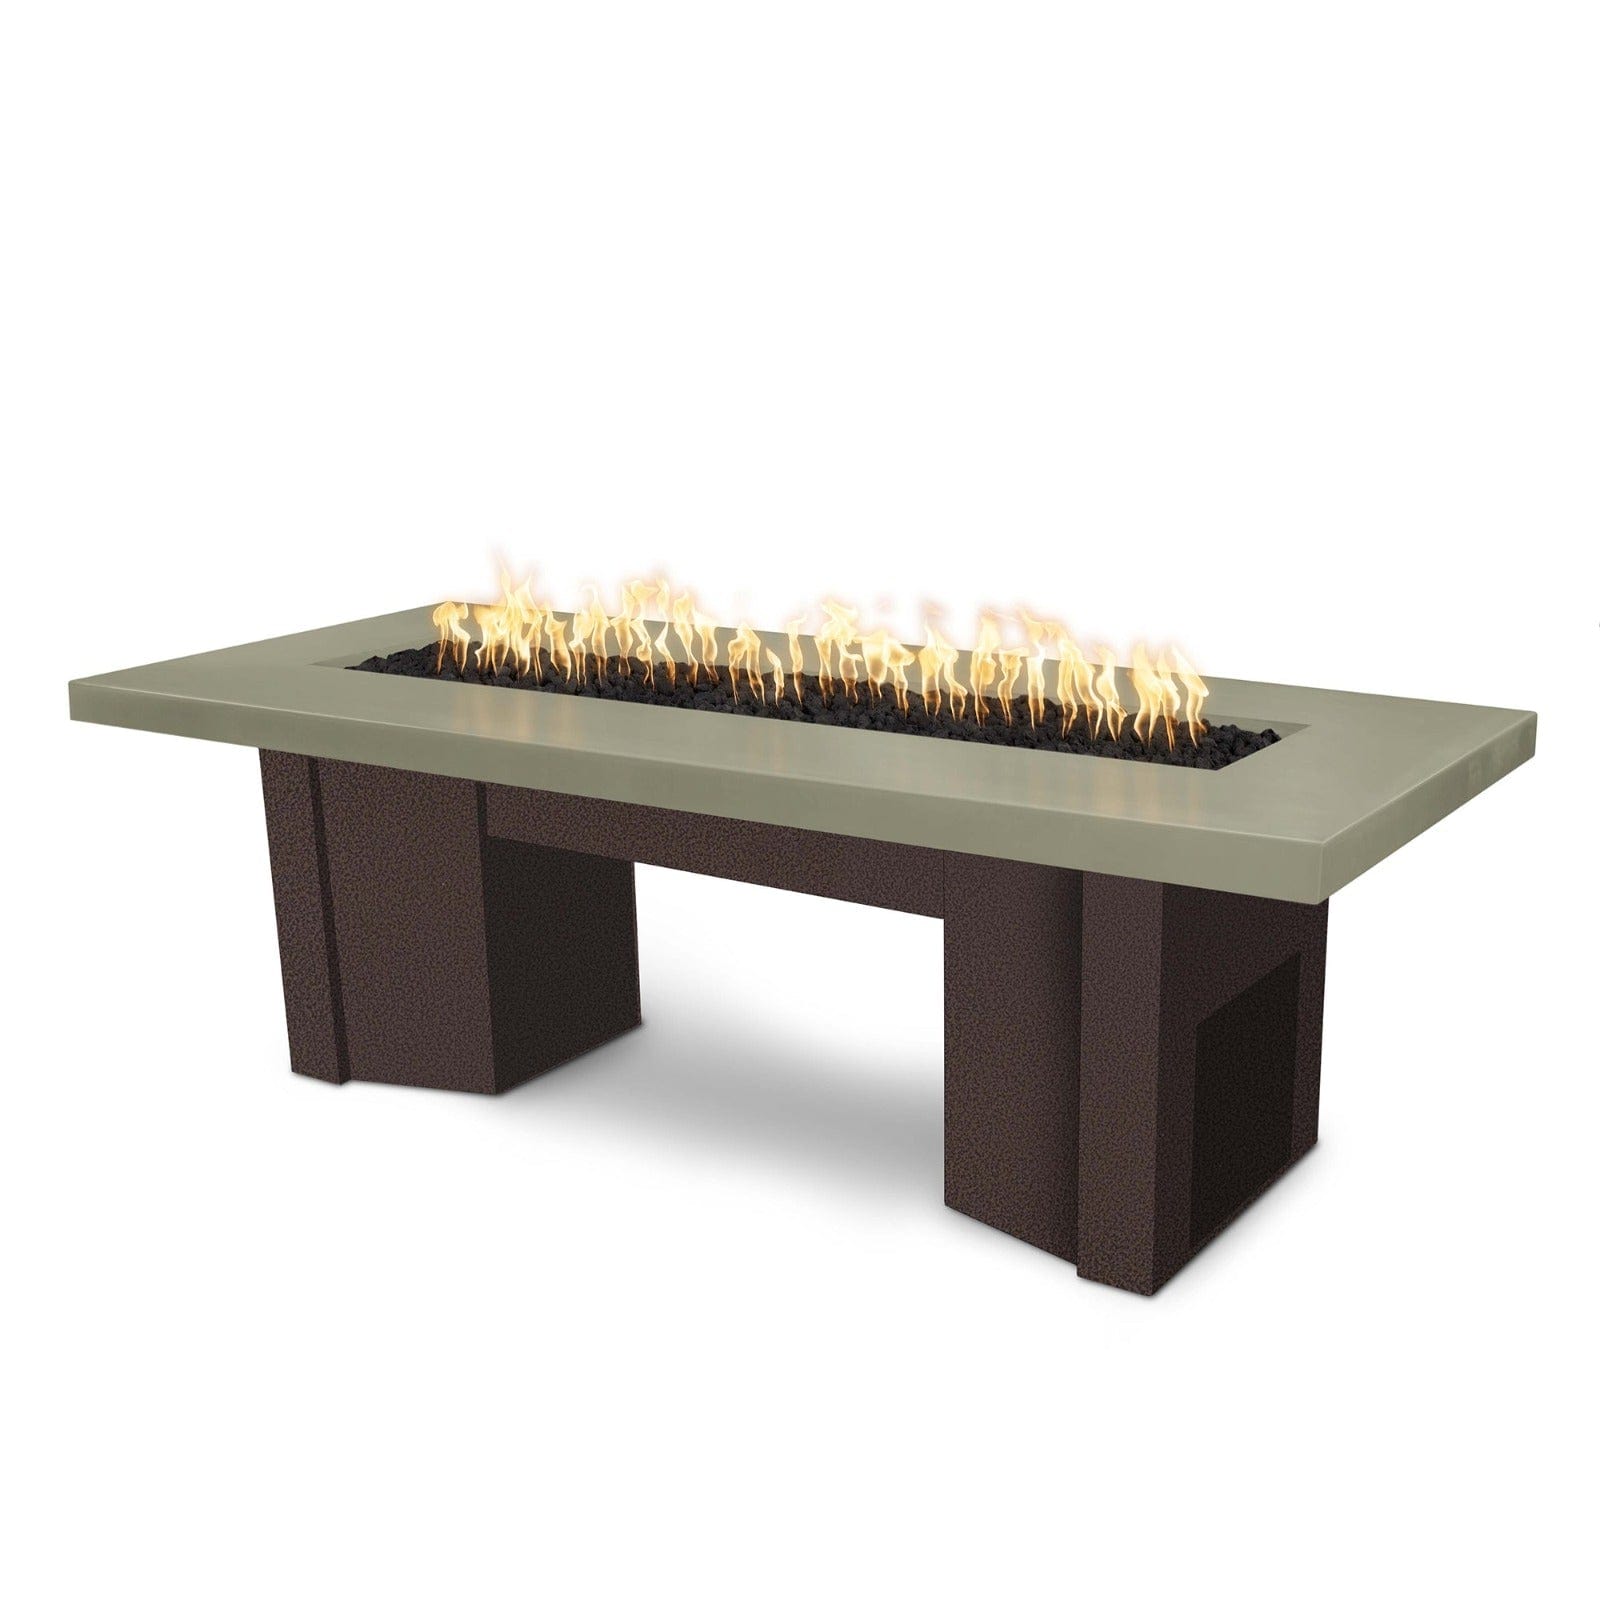 The Outdoor Plus Fire Features Ash (-ASH) / Copper Vein Powder Coated Steel (-CPV) The Outdoor Plus 78" Alameda Fire Table Smooth Concrete in Natural Gas - Match Lit with Flame Sense System / OPT-ALMGFRC78FSML-NG